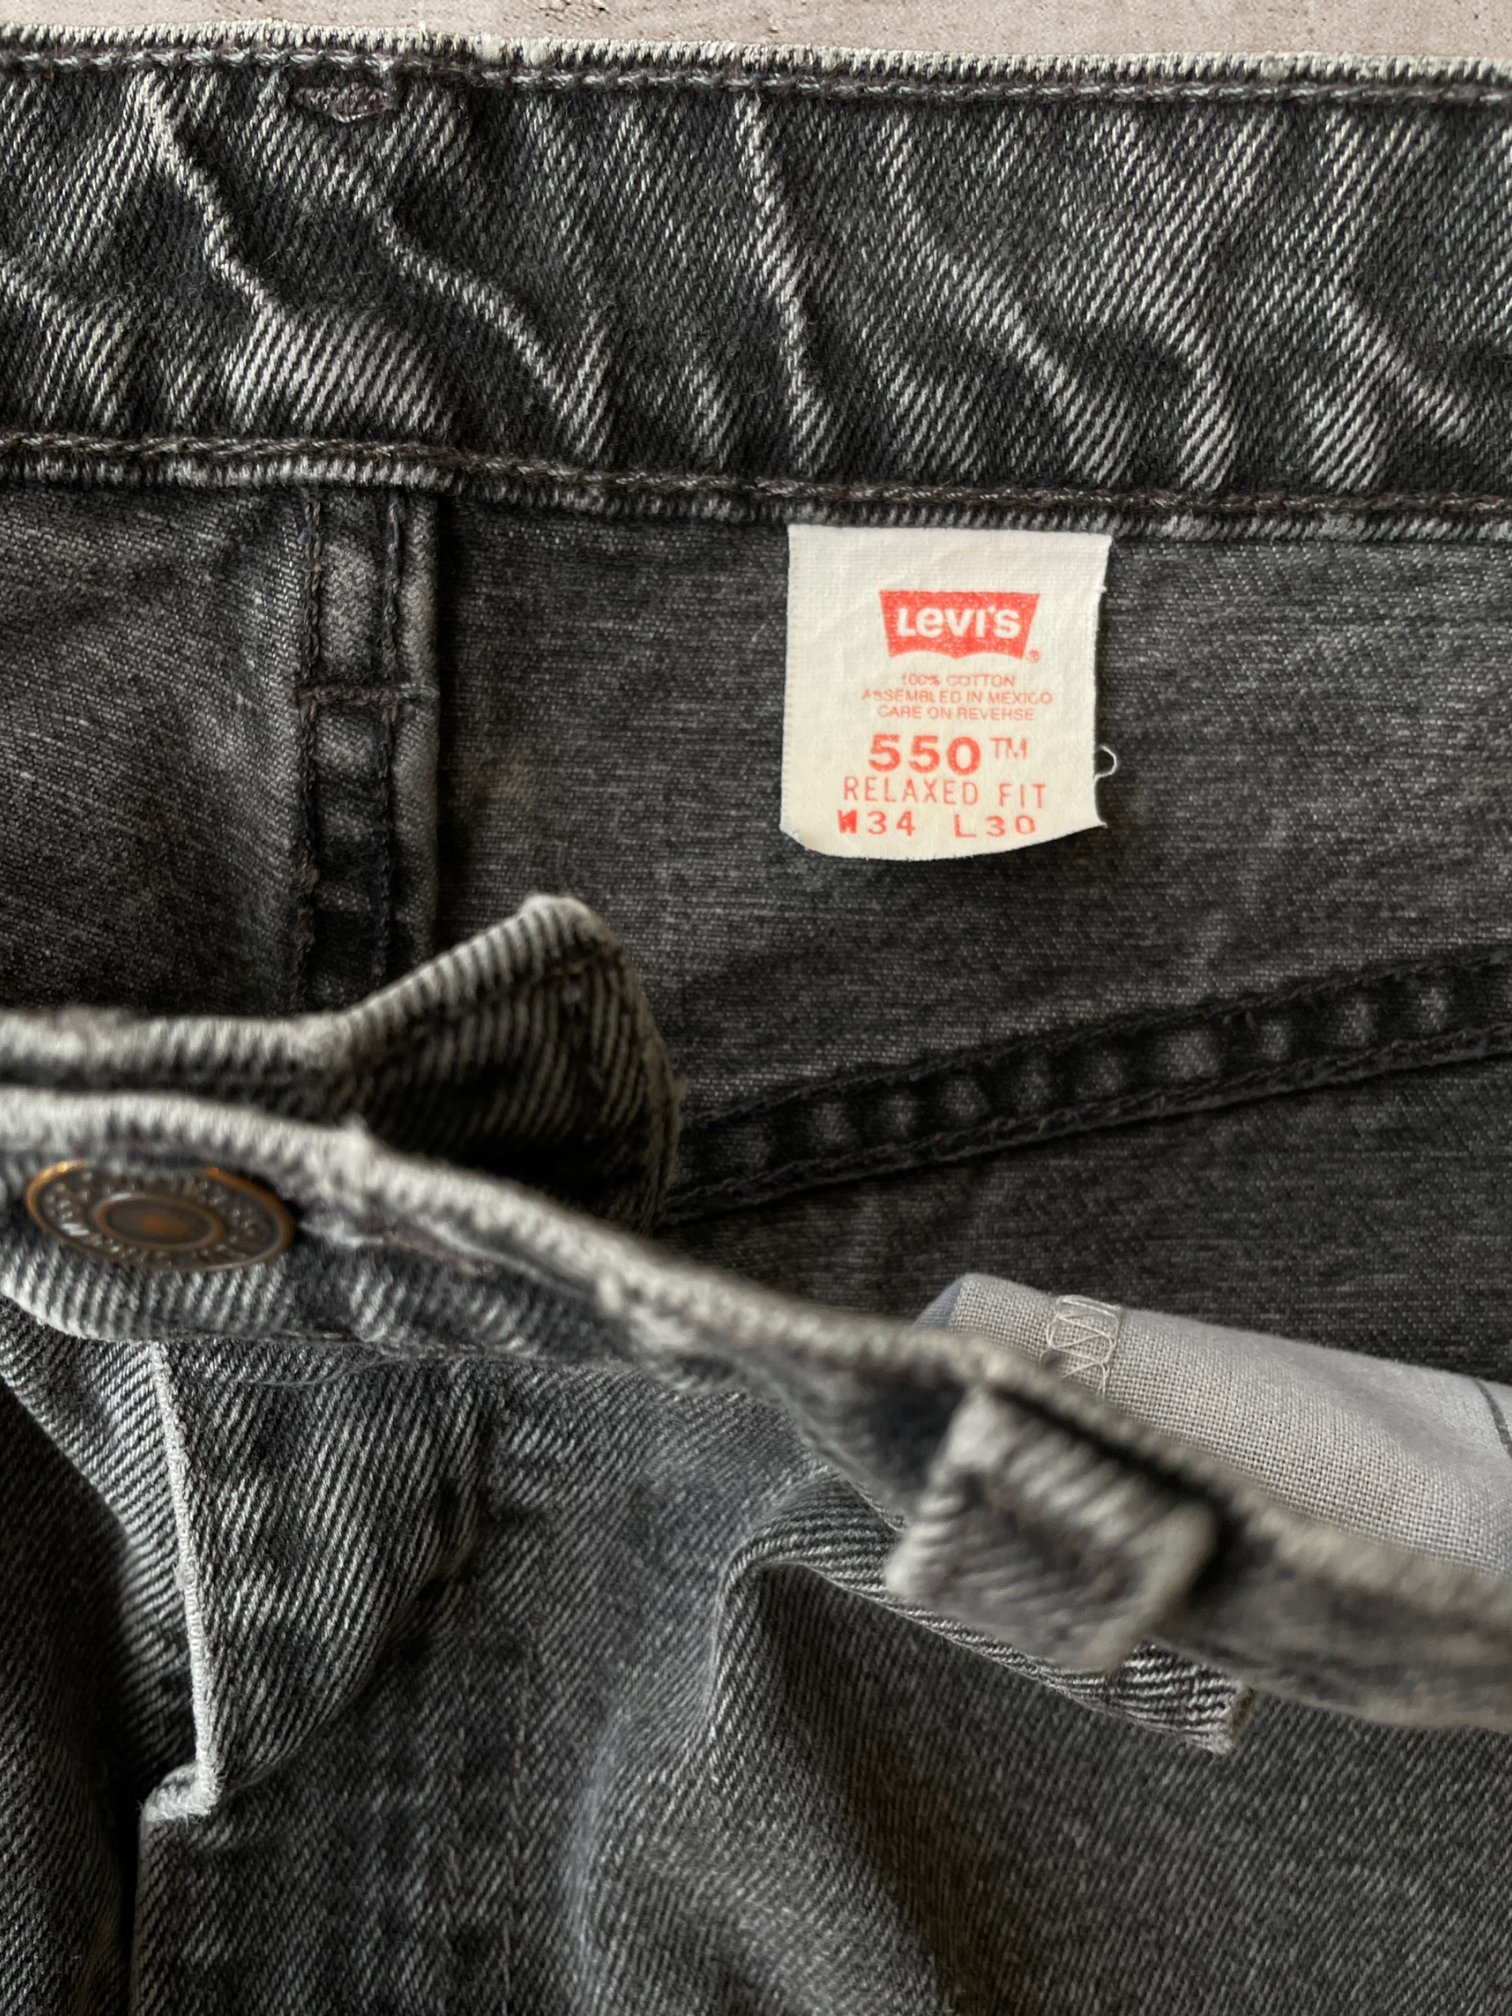 80s Levis 550 Relaxed Fit Jeans - 33x30